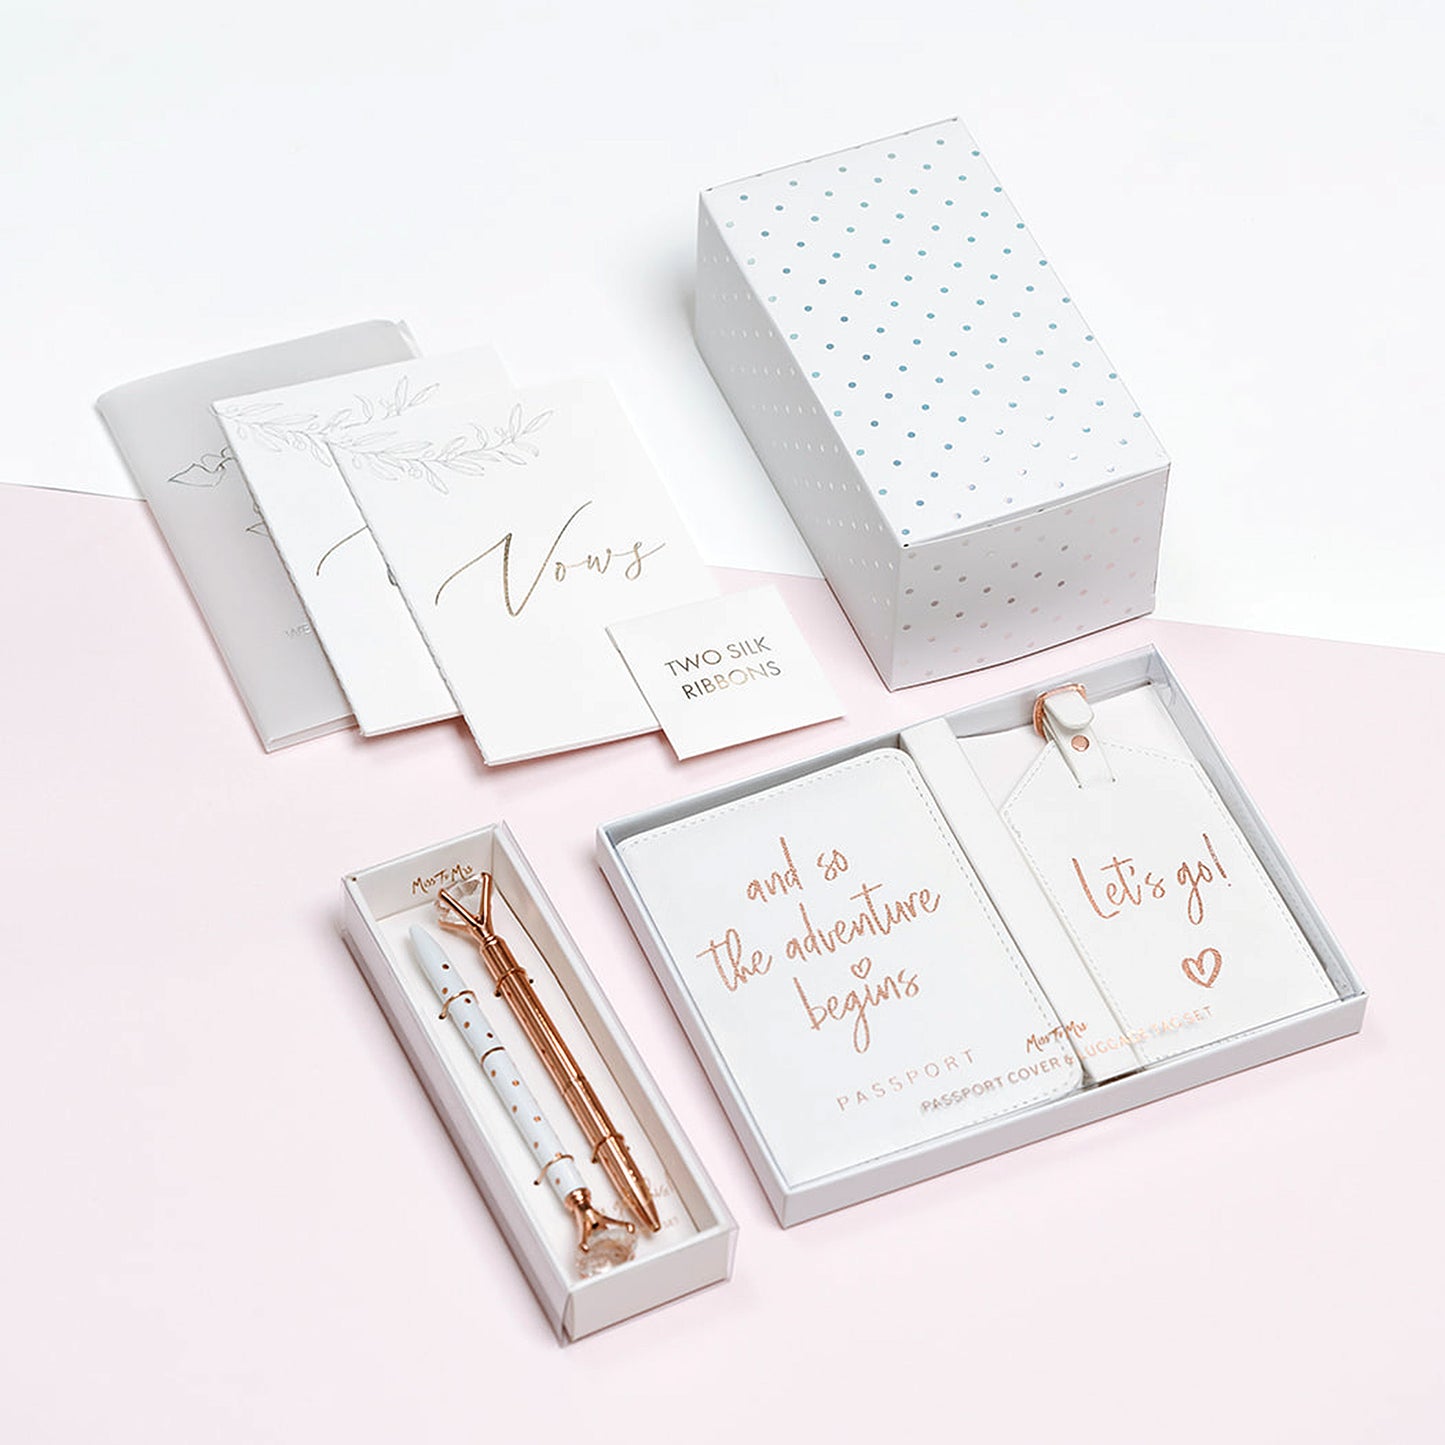 Vows Books Set, "Diamond" Top Pens and Passport Cover and Luggage Tag set from 15-in-1 Ultimate Bride Box